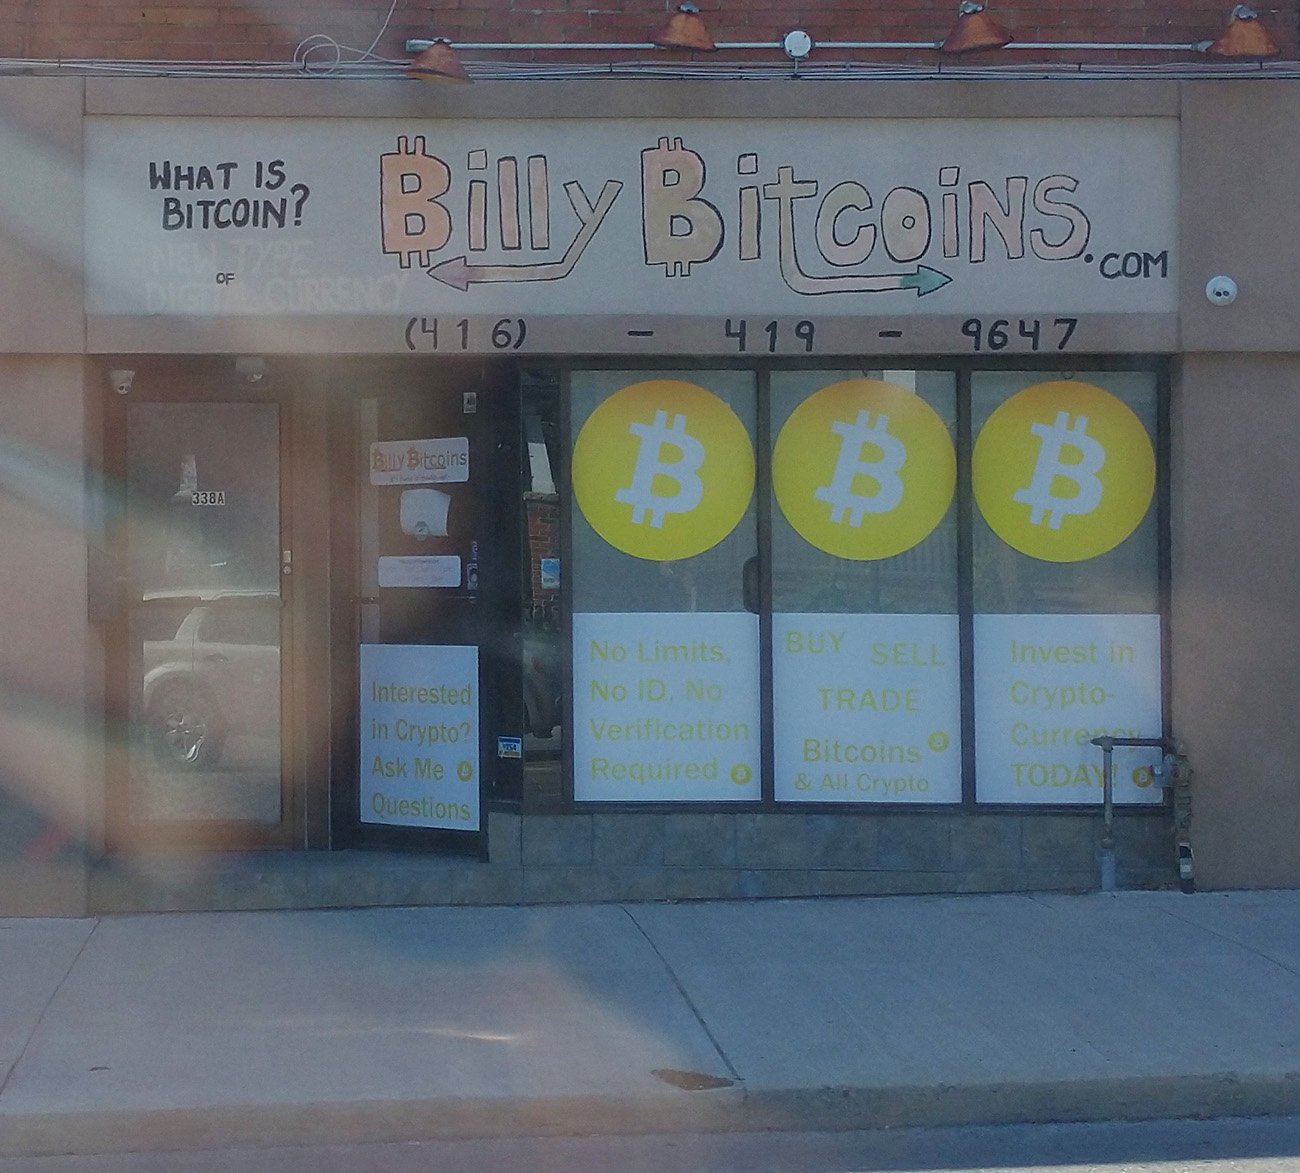 No idea who Billy Bitcoin is or what he does.